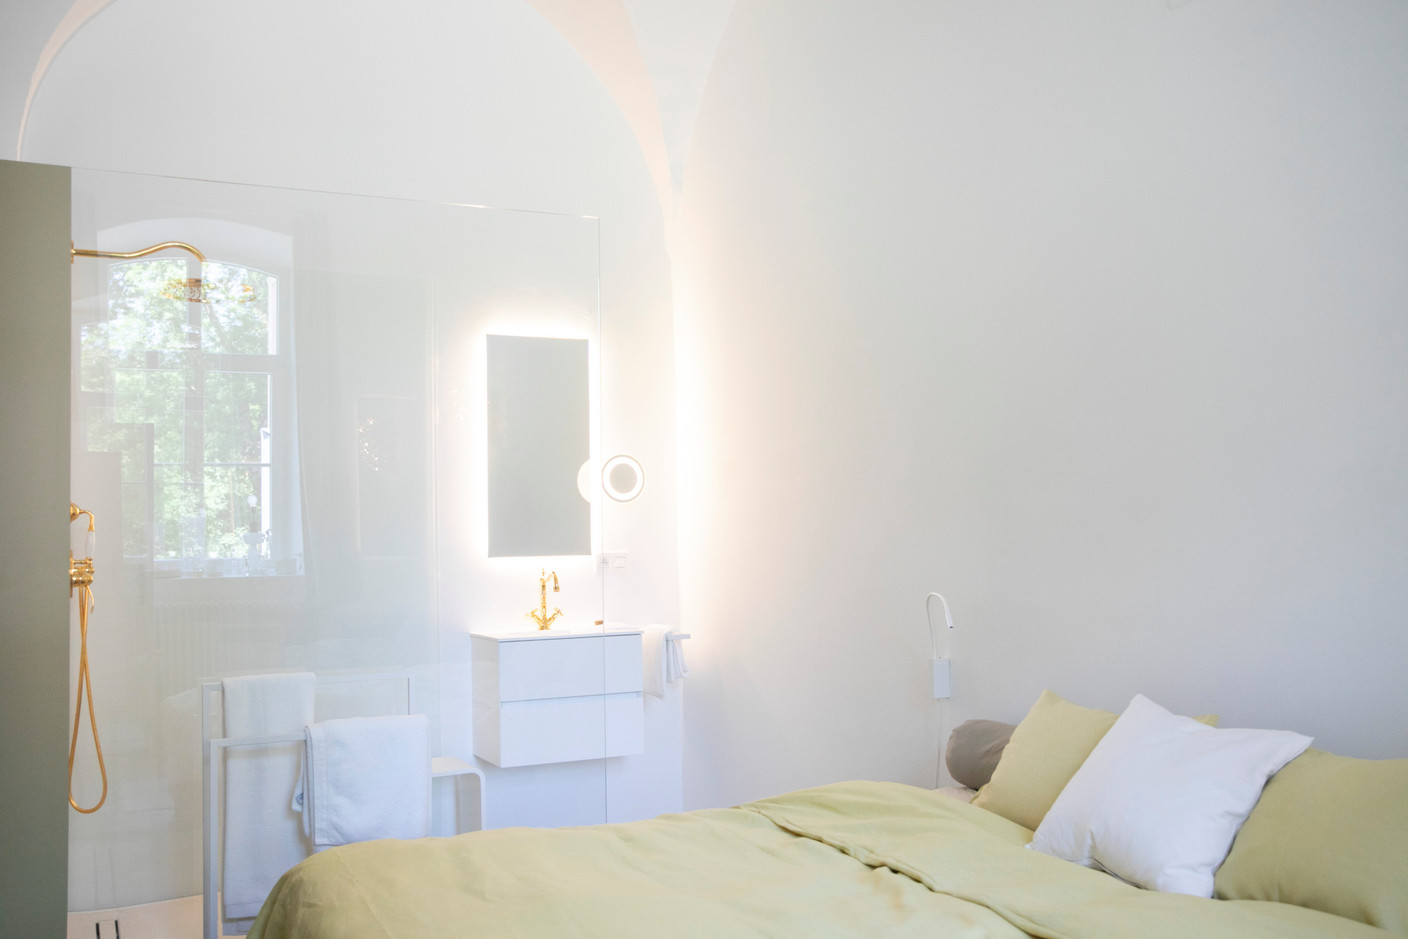 Beautiful rooms, where the work of light has been the object of particular care. (Photo: Matic Zorman/Maison Moderne)